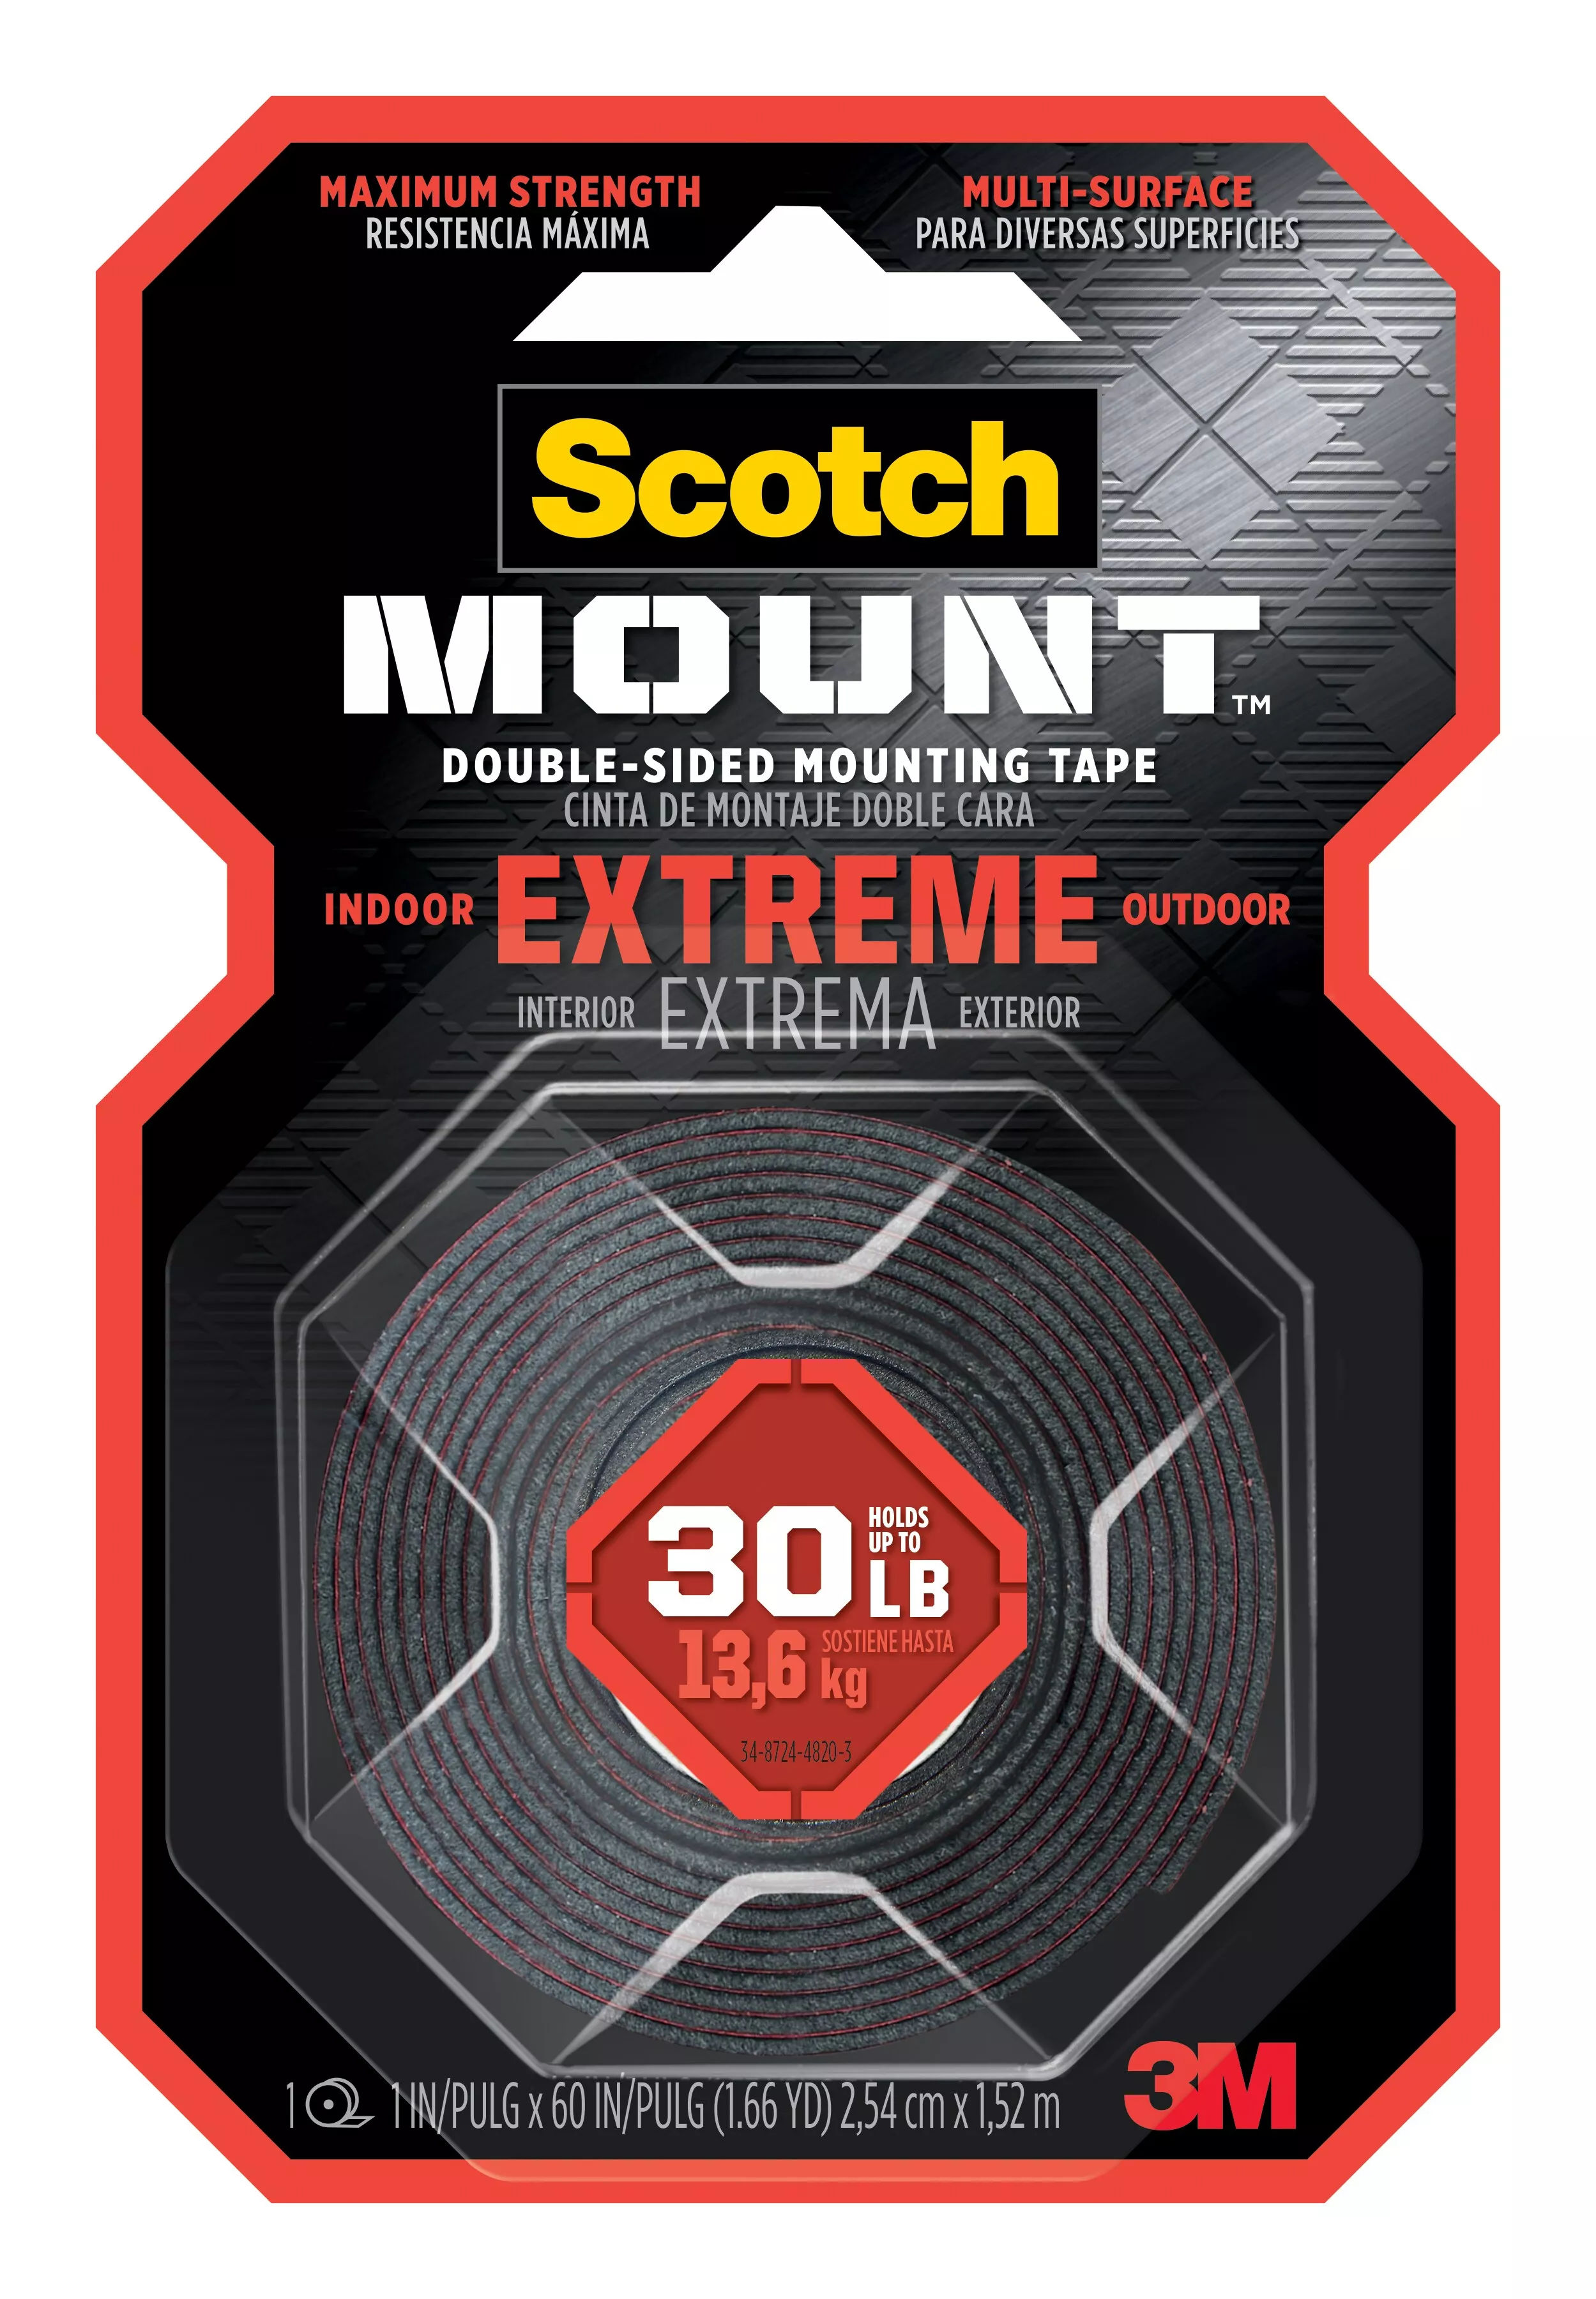 Scotch-Mount™ Extreme Double-Sided Mounting Tape 414H-DC, 1 In X 60 In
(2,54 Cm X 1,52 M)